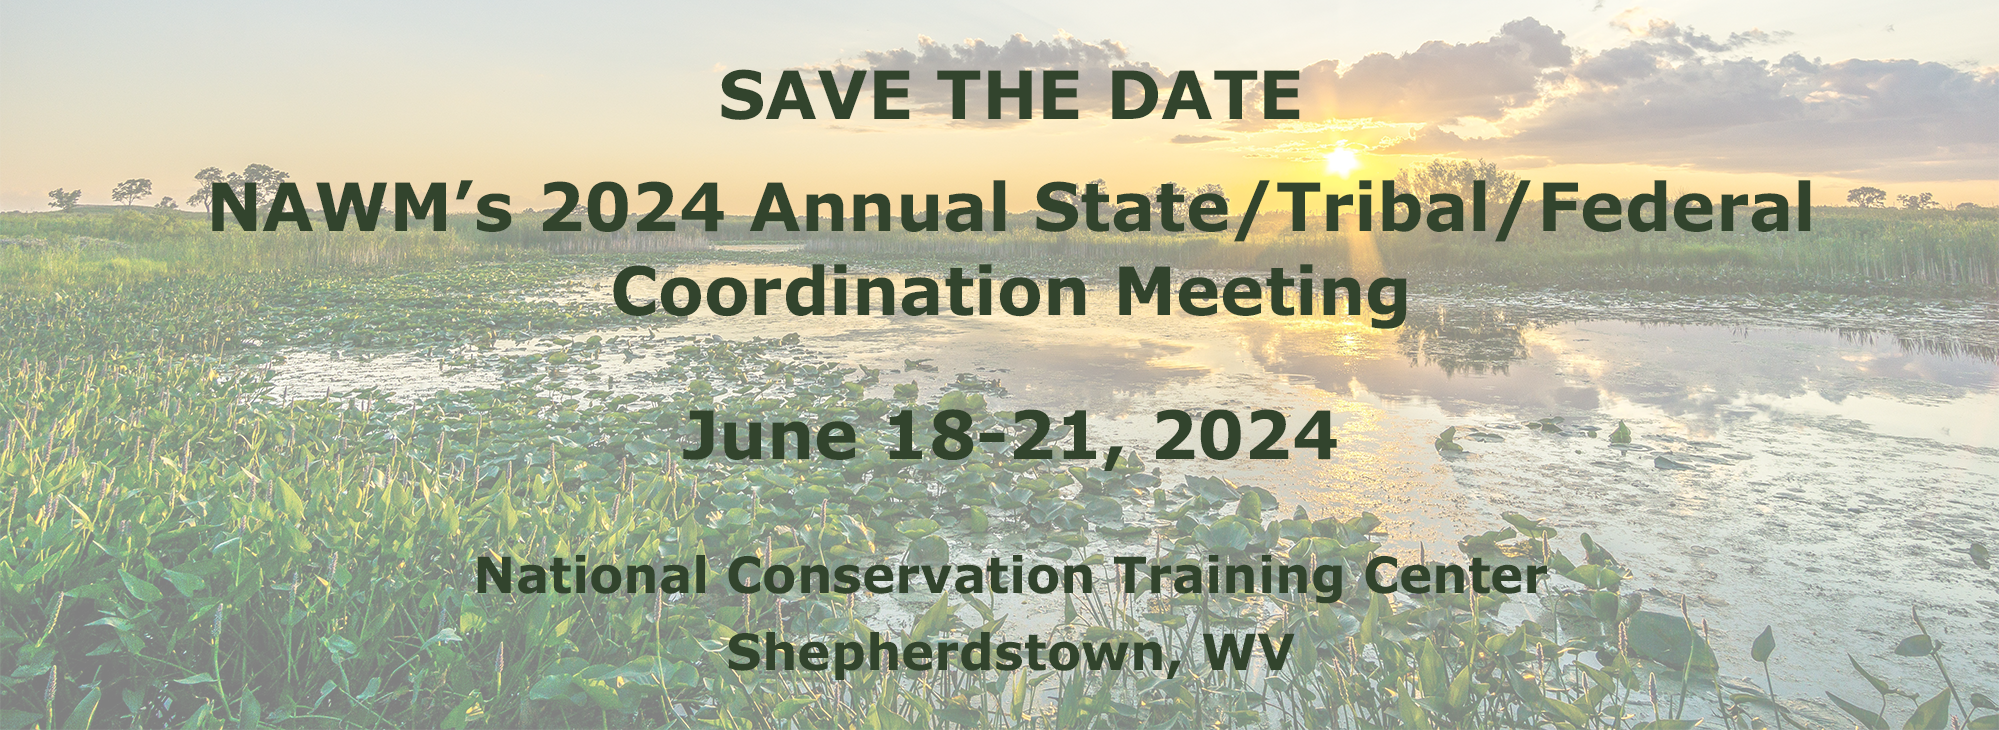 2024 NAWM's Annual State/Tribal/Federal Coordination Meeting